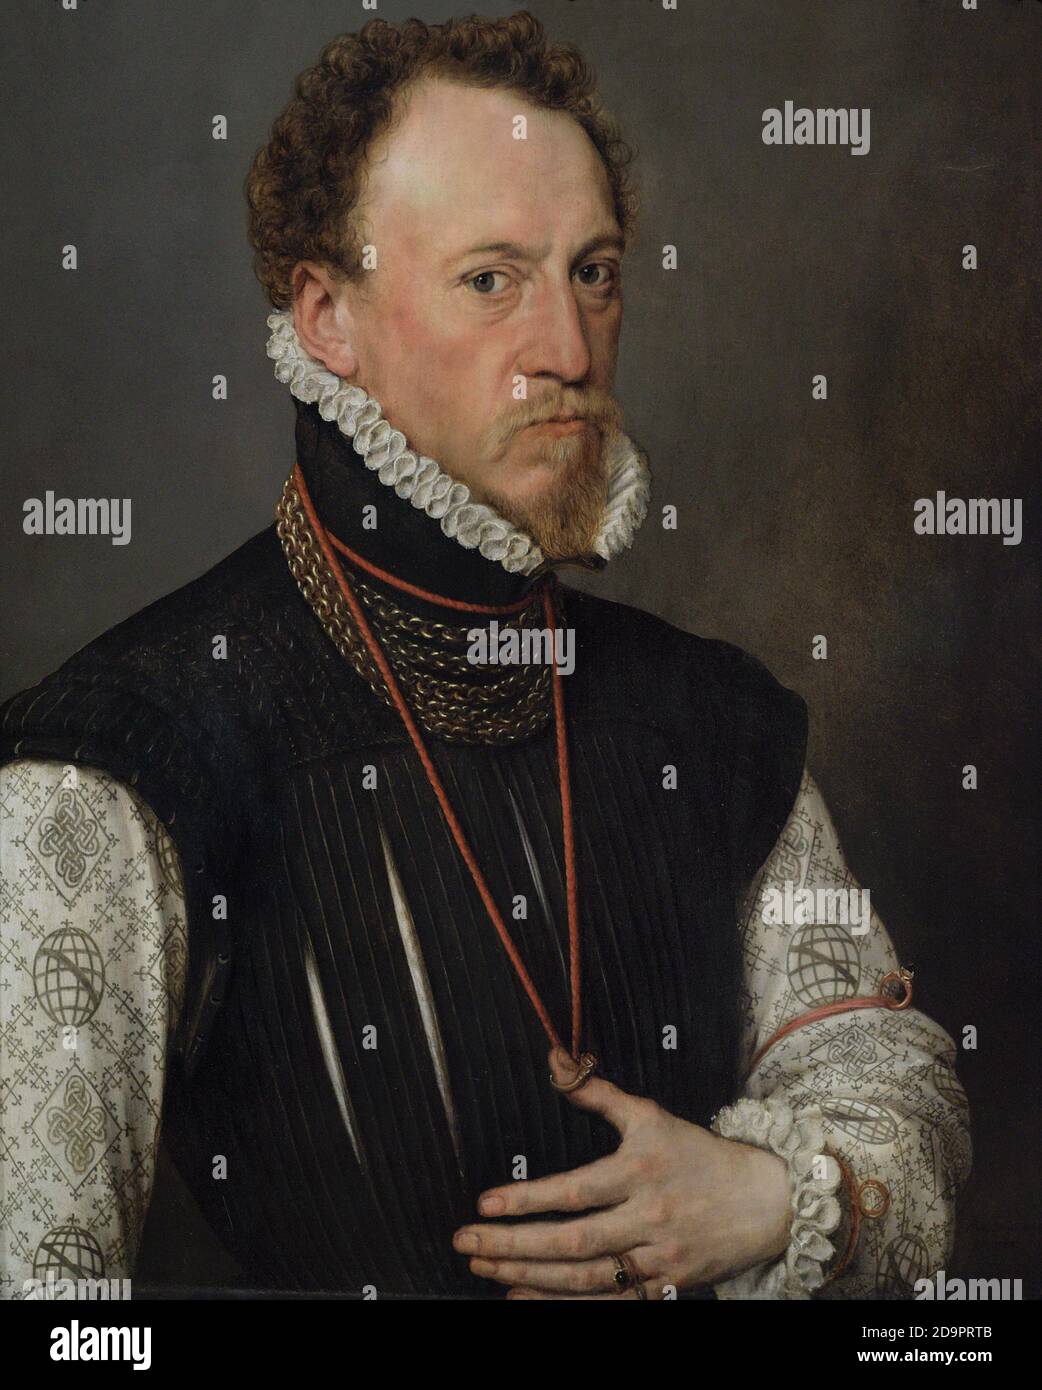 Henry Lee of Ditchley (1533-1611). Queen's Champion and Master of Armouries. Favourite of Queen Elizabeth I. Portrait by Anthonis Mor (1516-1575/76). Oil on panel, 1568. National Portrait Gallery. London, England, United Kingdom. Stock Photo